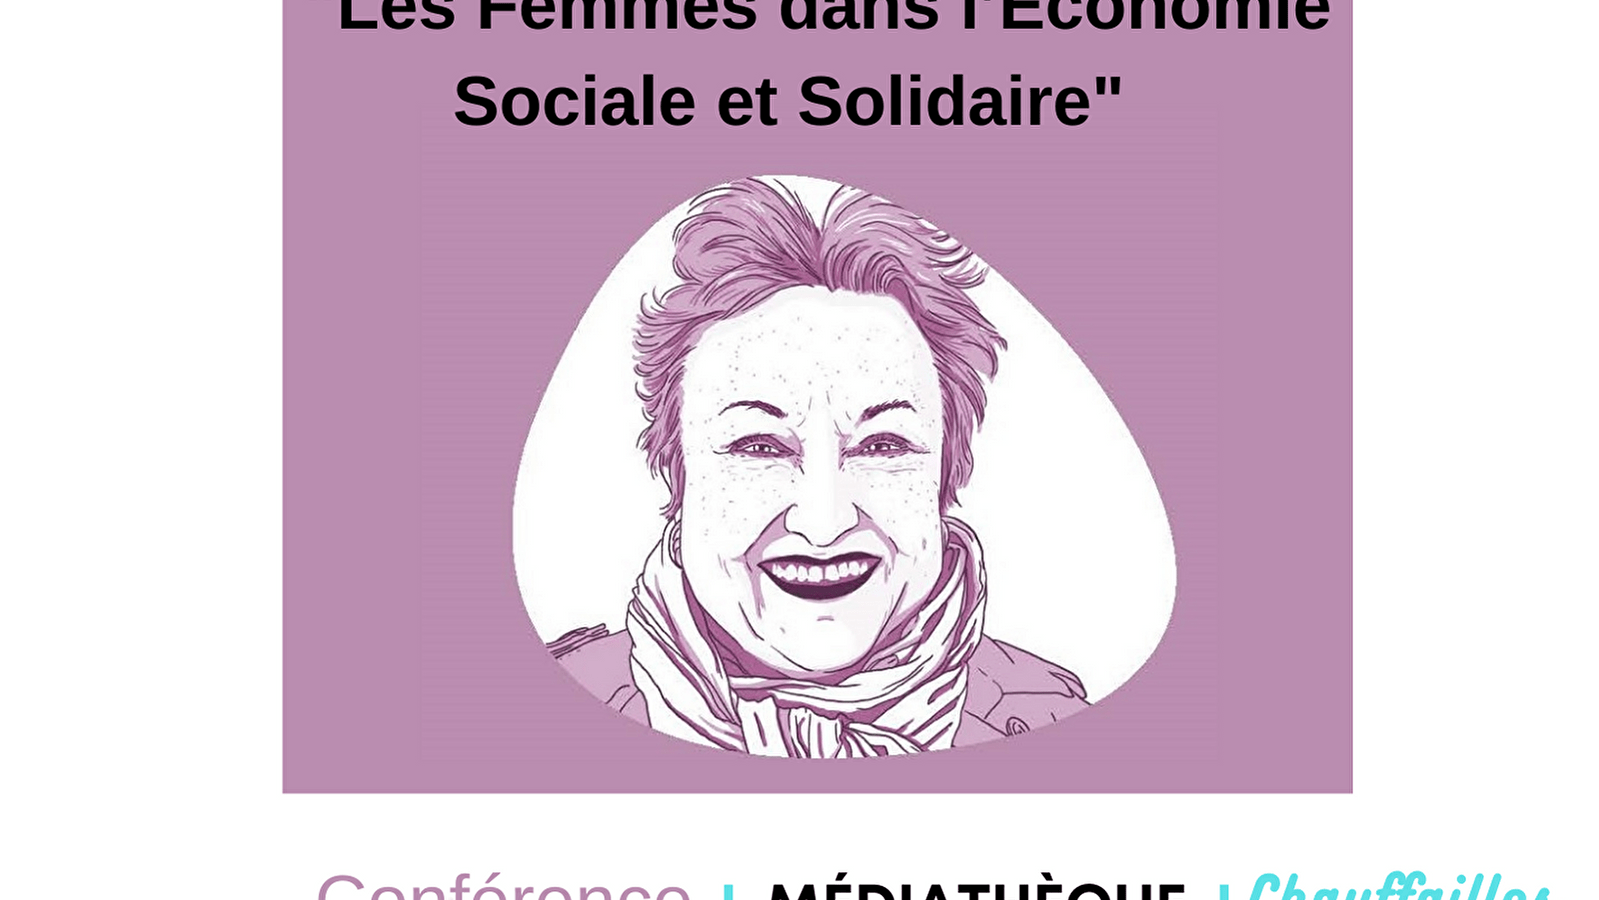 Women in the Social Solidarity Economy - Exhibition and Conference/Debate